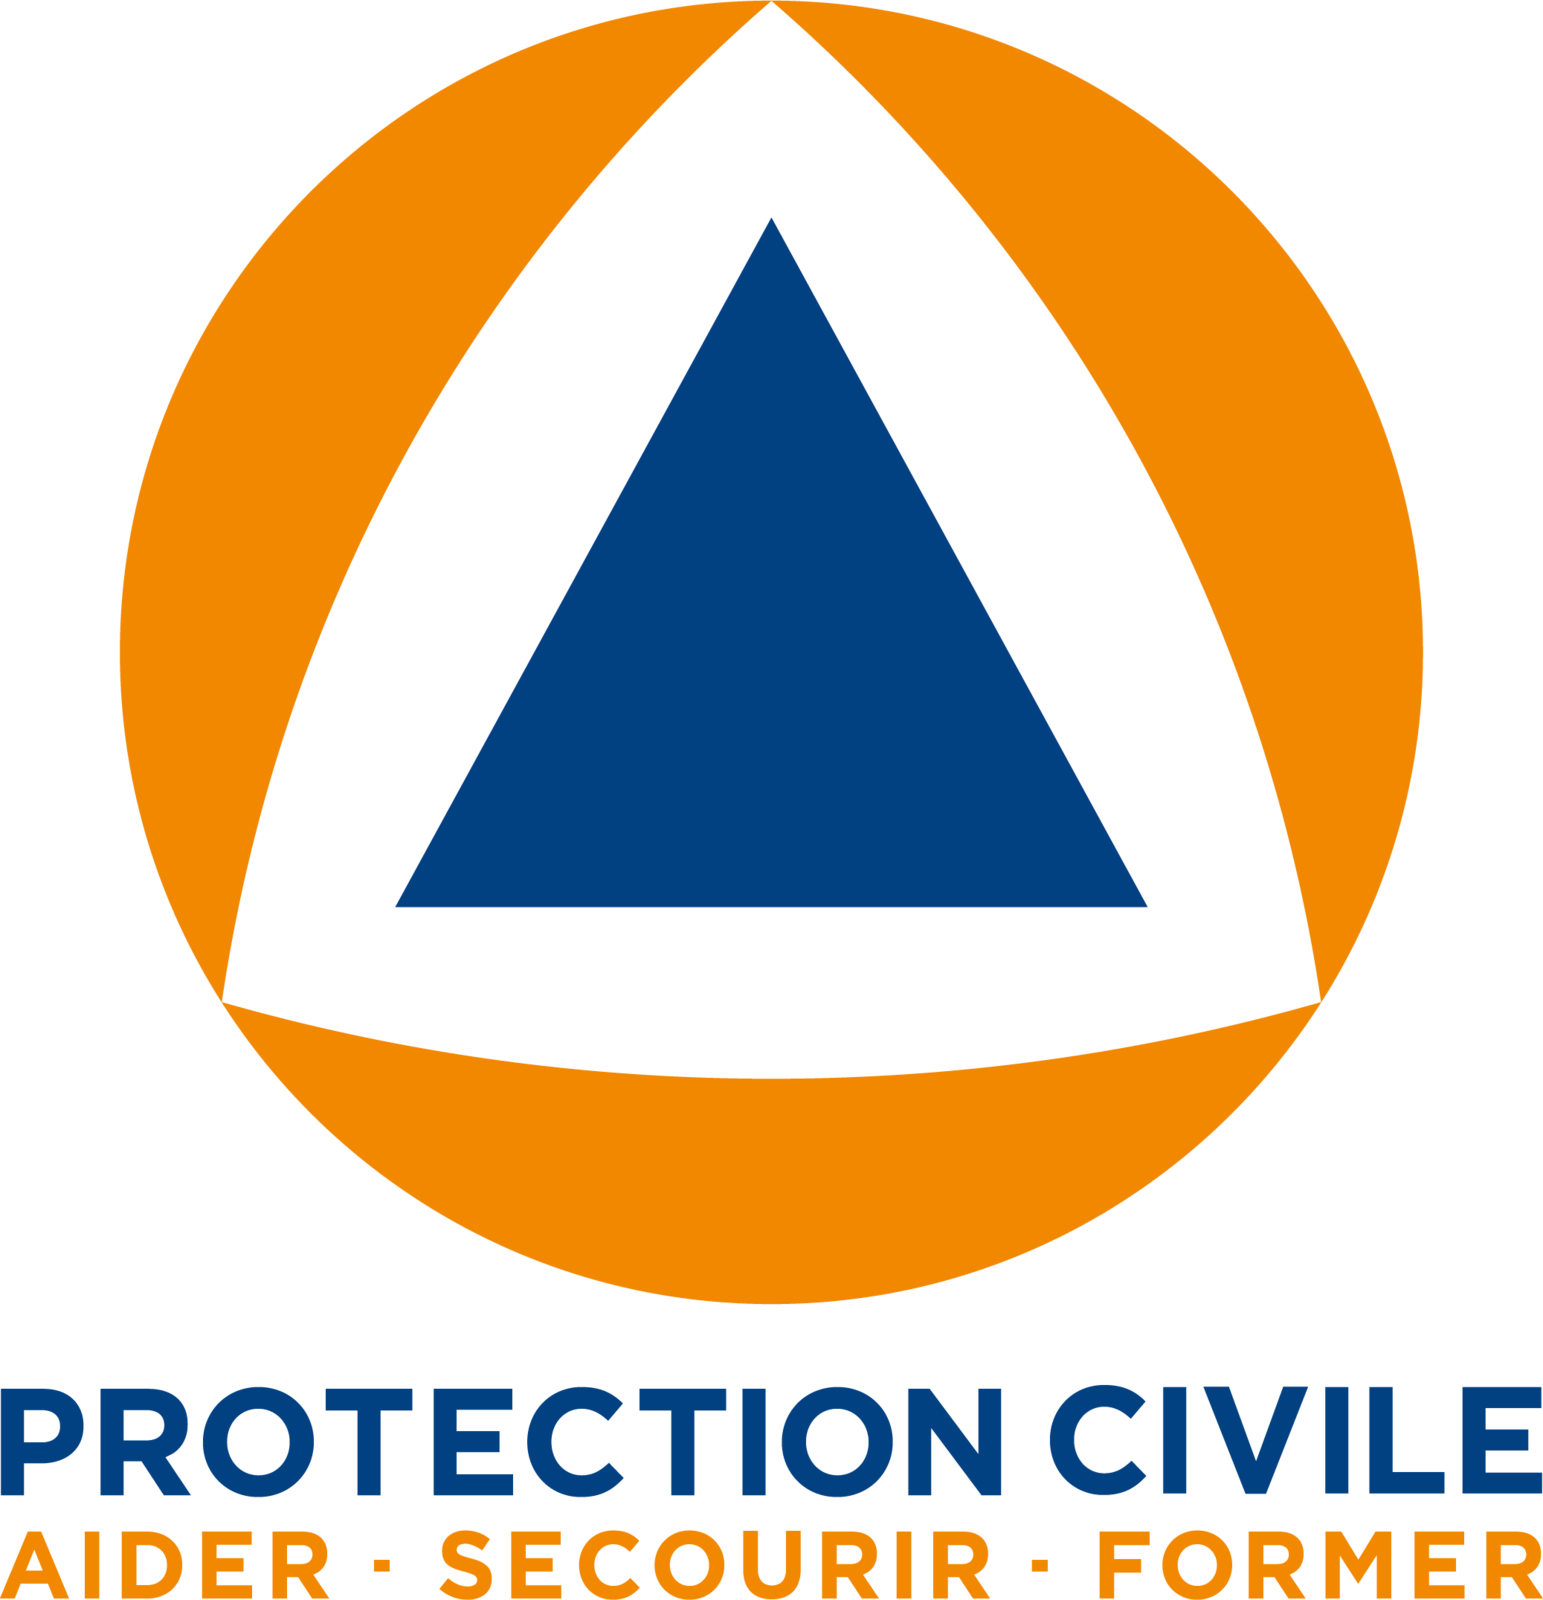 Milton is a partner of Civil Protection